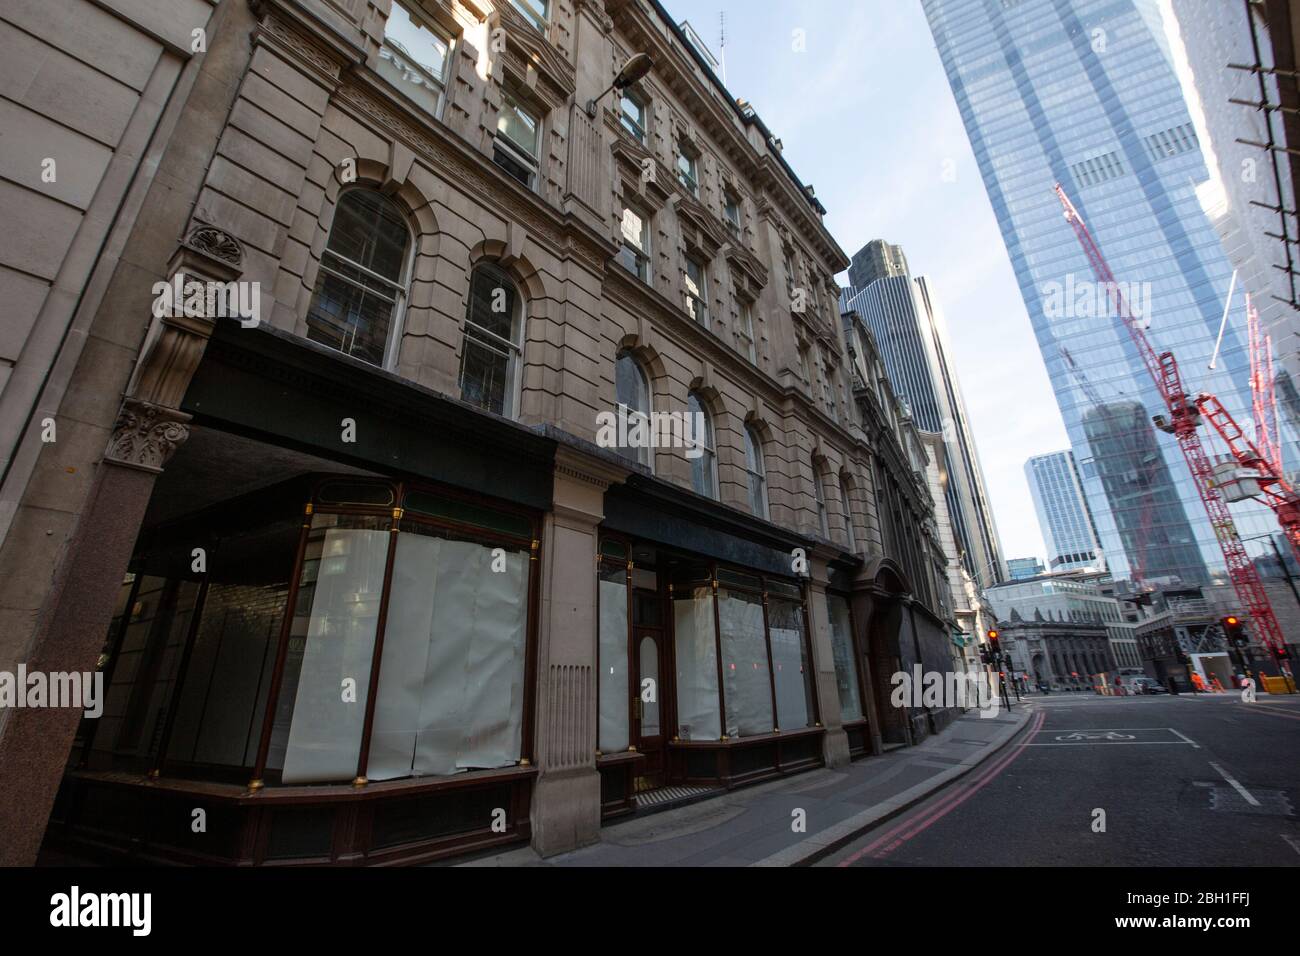 London, UK. 23rd Apr 2020. A closed-up shopfront on Bishopsgate due to the COVID-19 pandemic in the City of London, as lockdown measures need to be eased out in the next three to four weeks amid coronavirus for the economy to recover. City of London lockdown, England, United Kingdom 23rd April, 2020 Credit: Jeff Gilbert/Alamy Live News Stock Photo